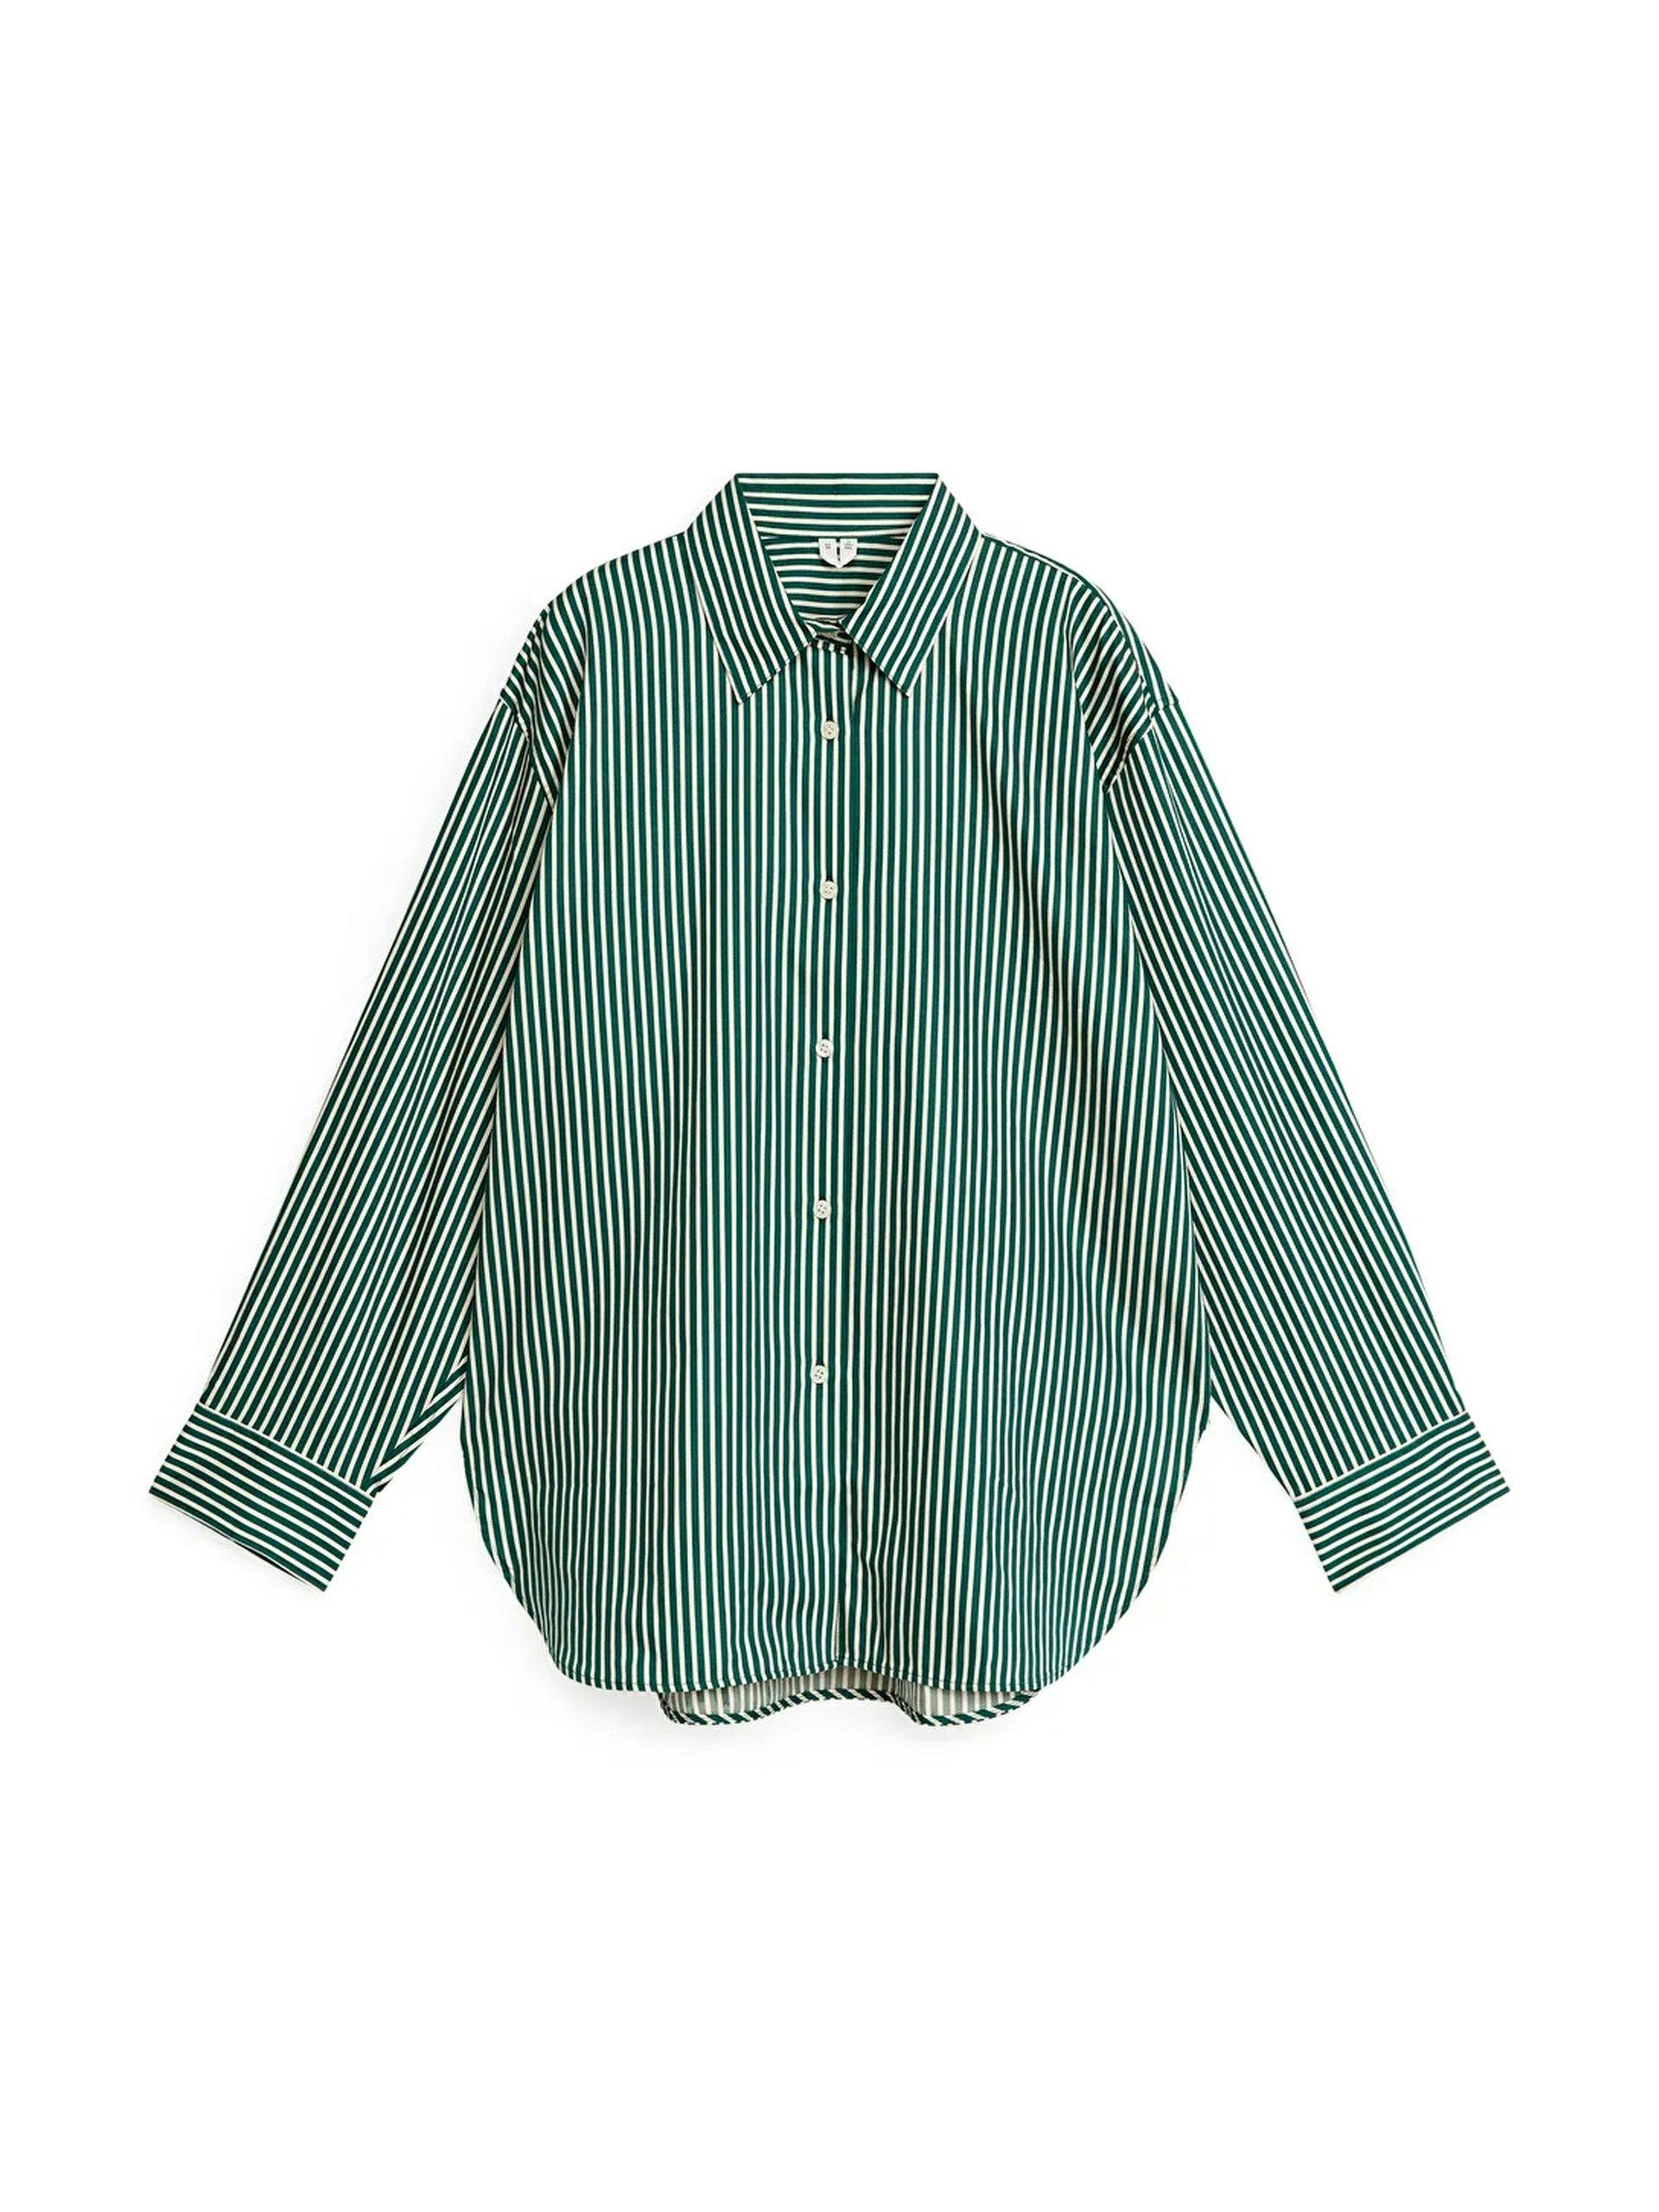 Relaxed green and white poplin shirt